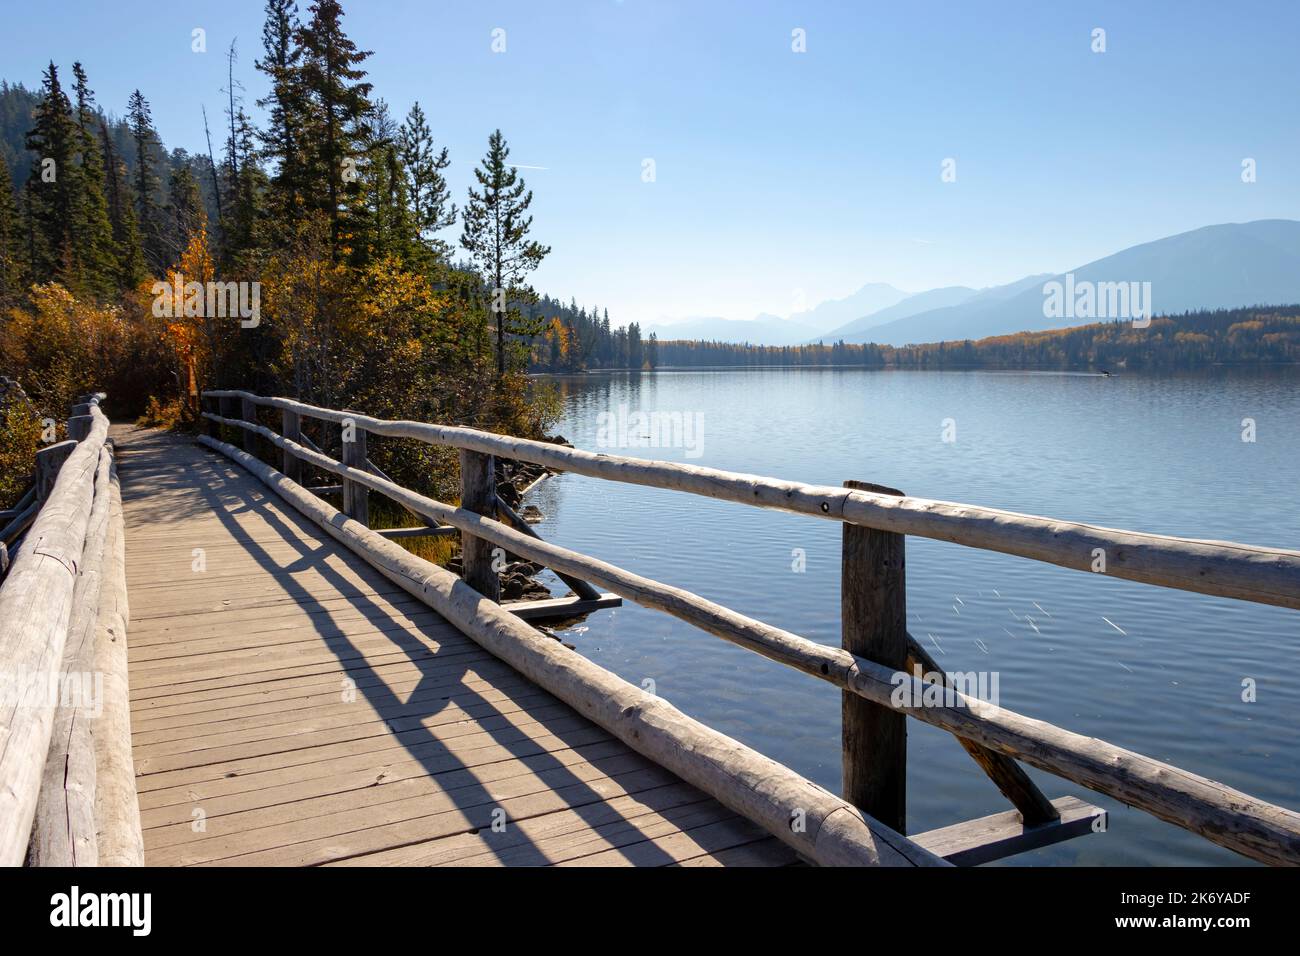 autumn scene of walkway across lake leading to trees with faint mountains in background Stock Photo